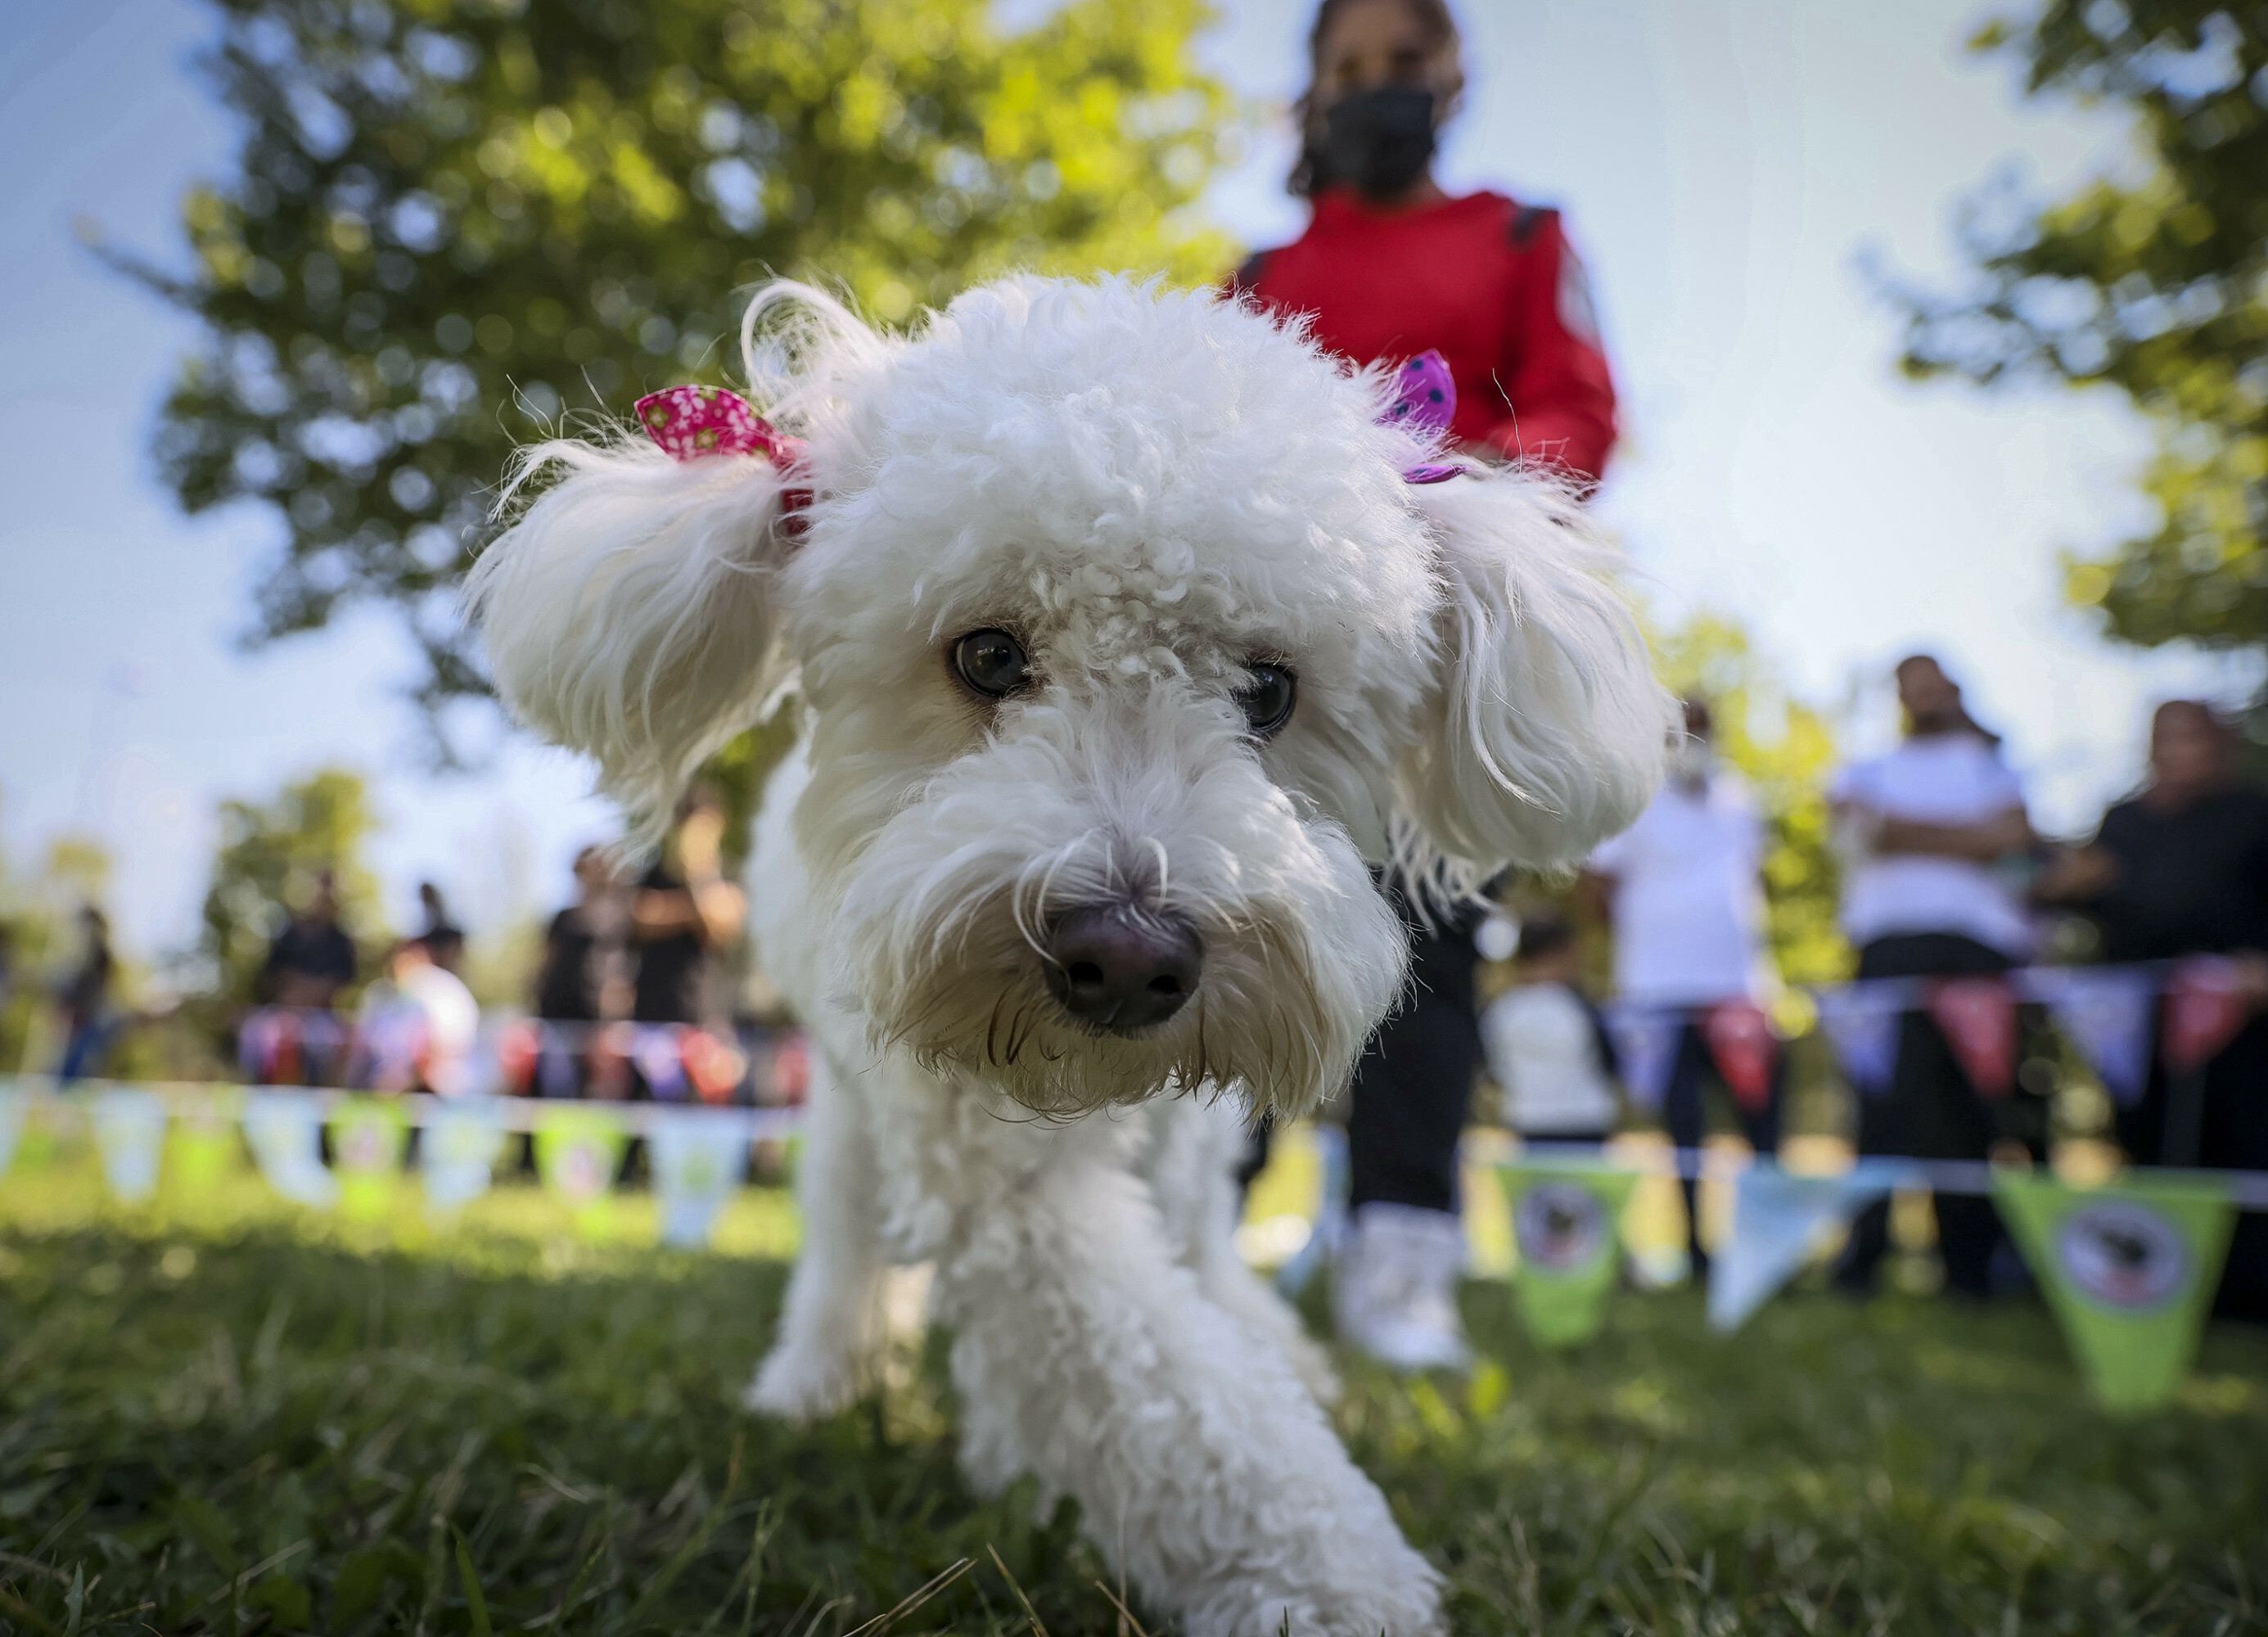 Furry friends go for the gold in Turkey dog competition